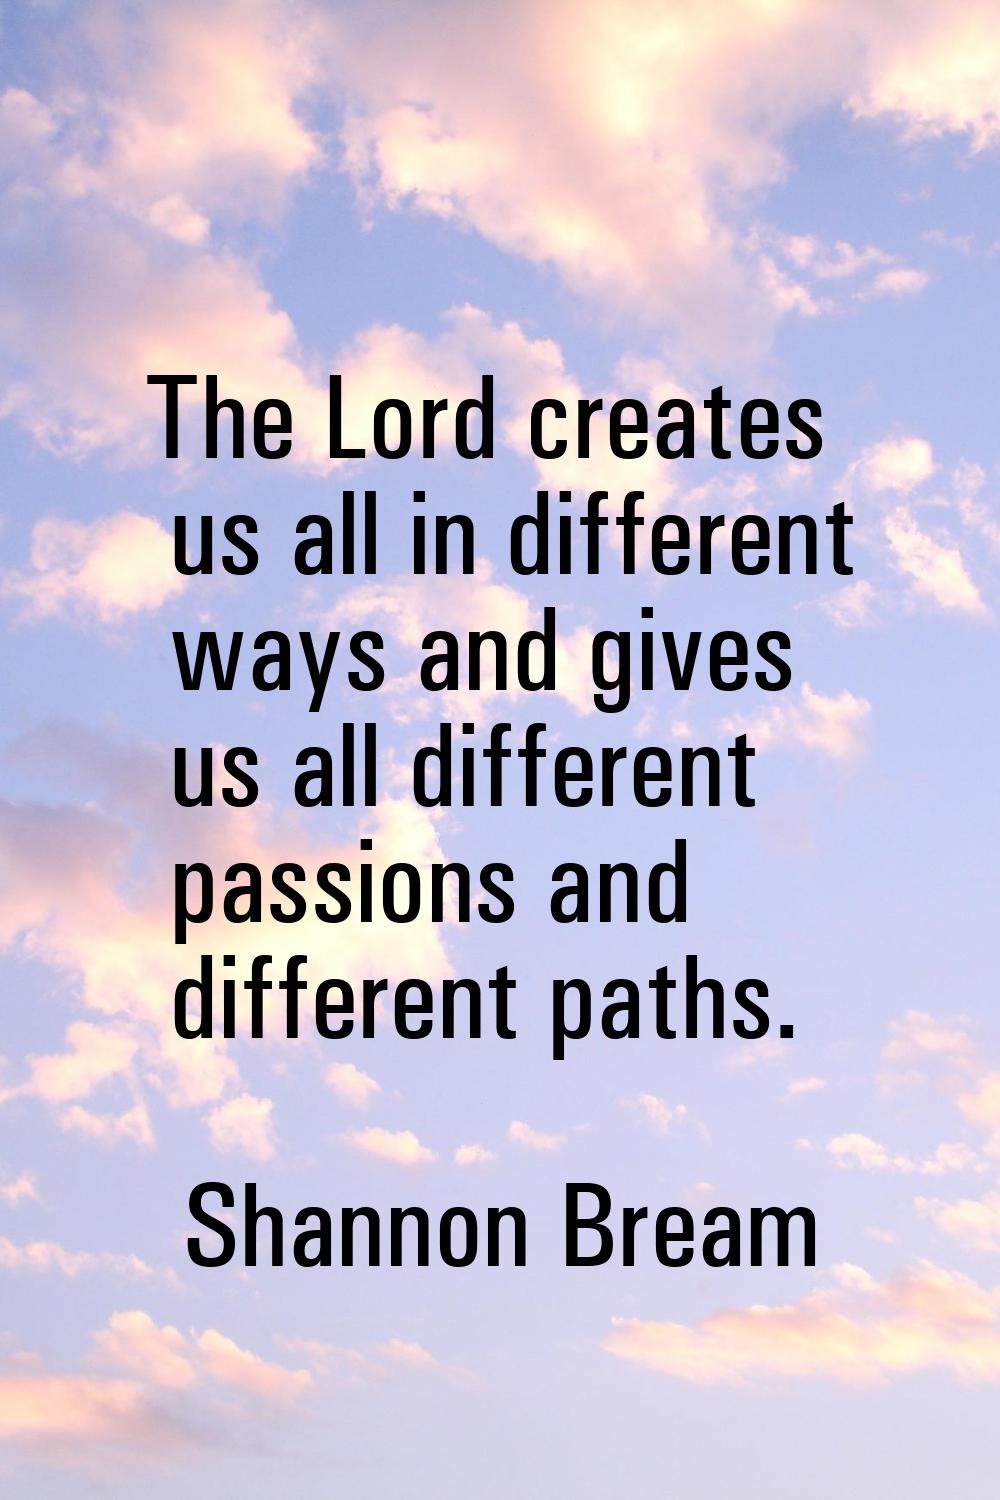 The Lord creates us all in different ways and gives us all different passions and different paths.